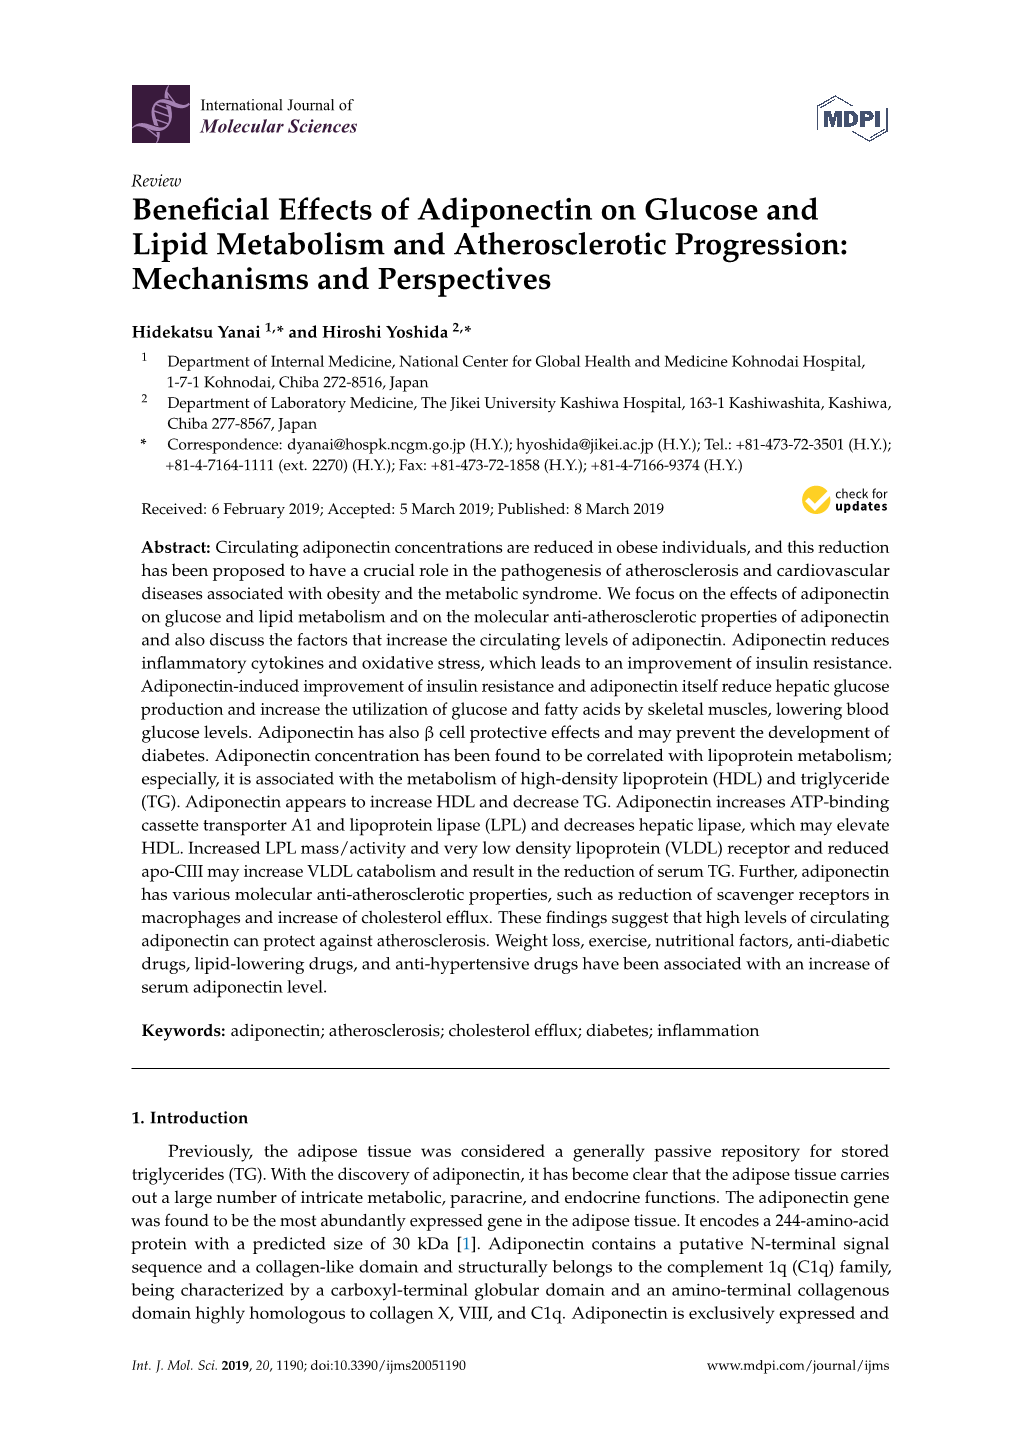 Beneficial Effects of Adiponectin on Glucose and Lipid Metabolism And